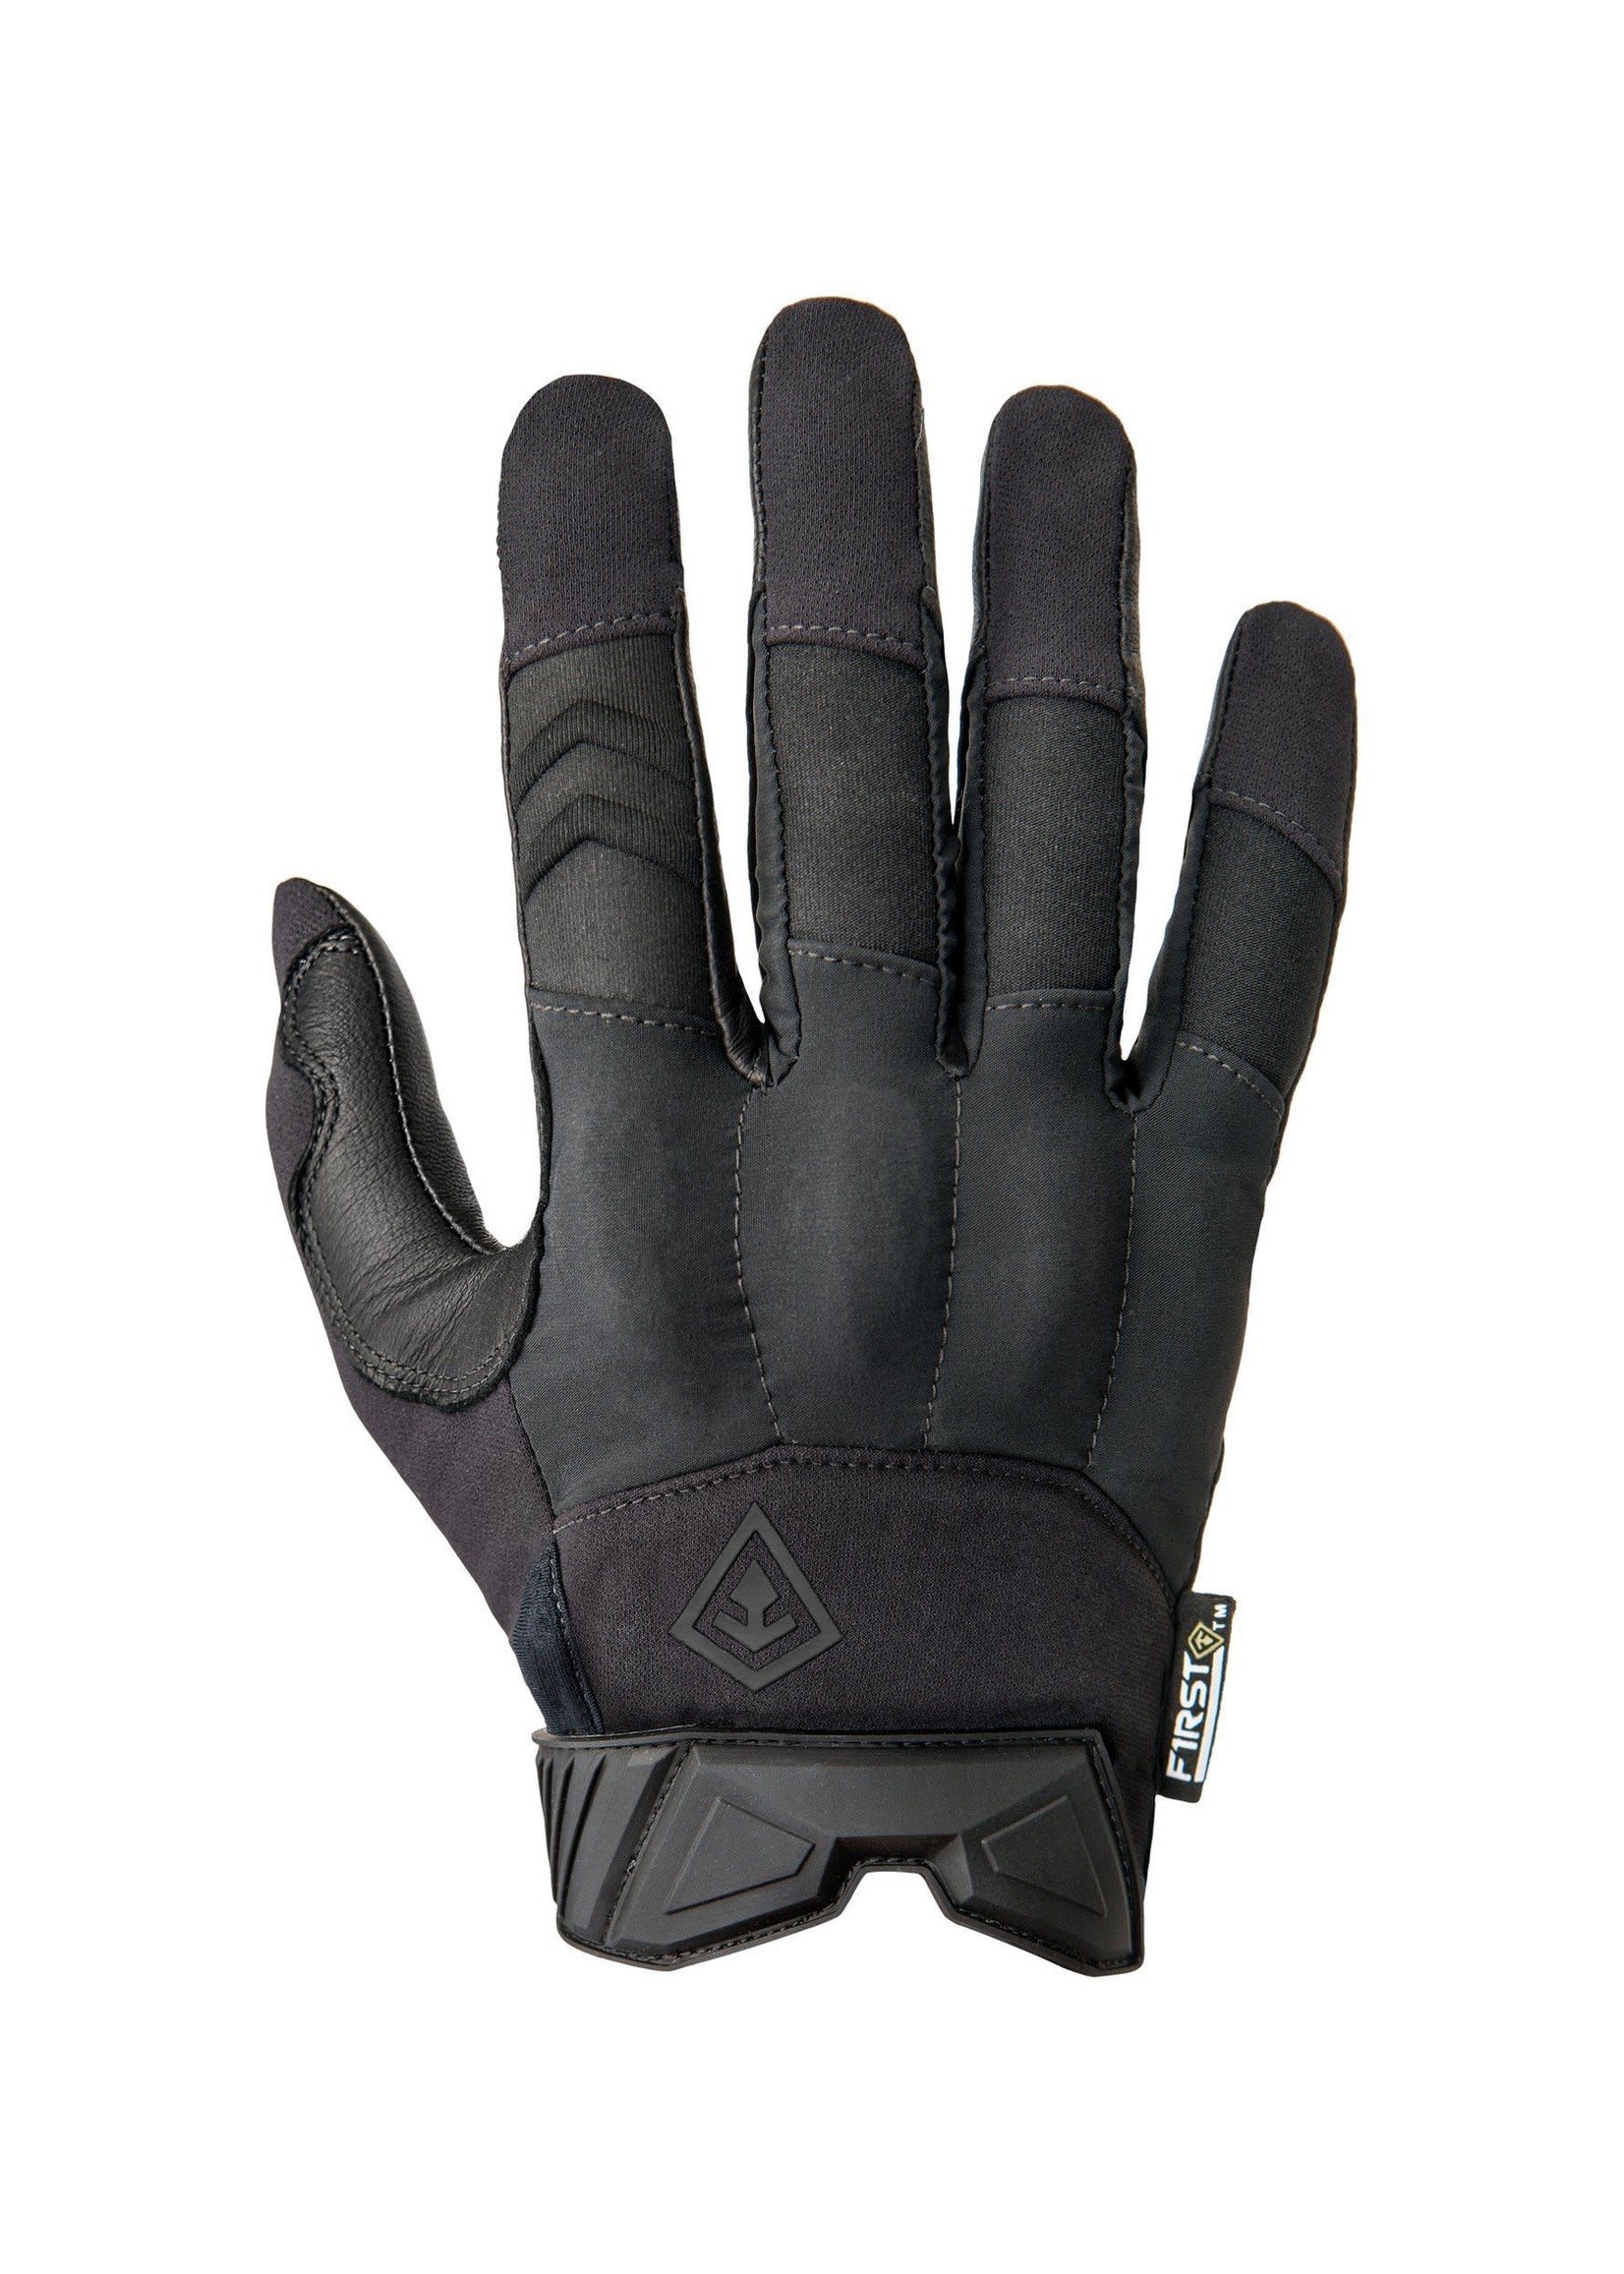 First Tactical First Tactical Men's Pro Knuckle Glove